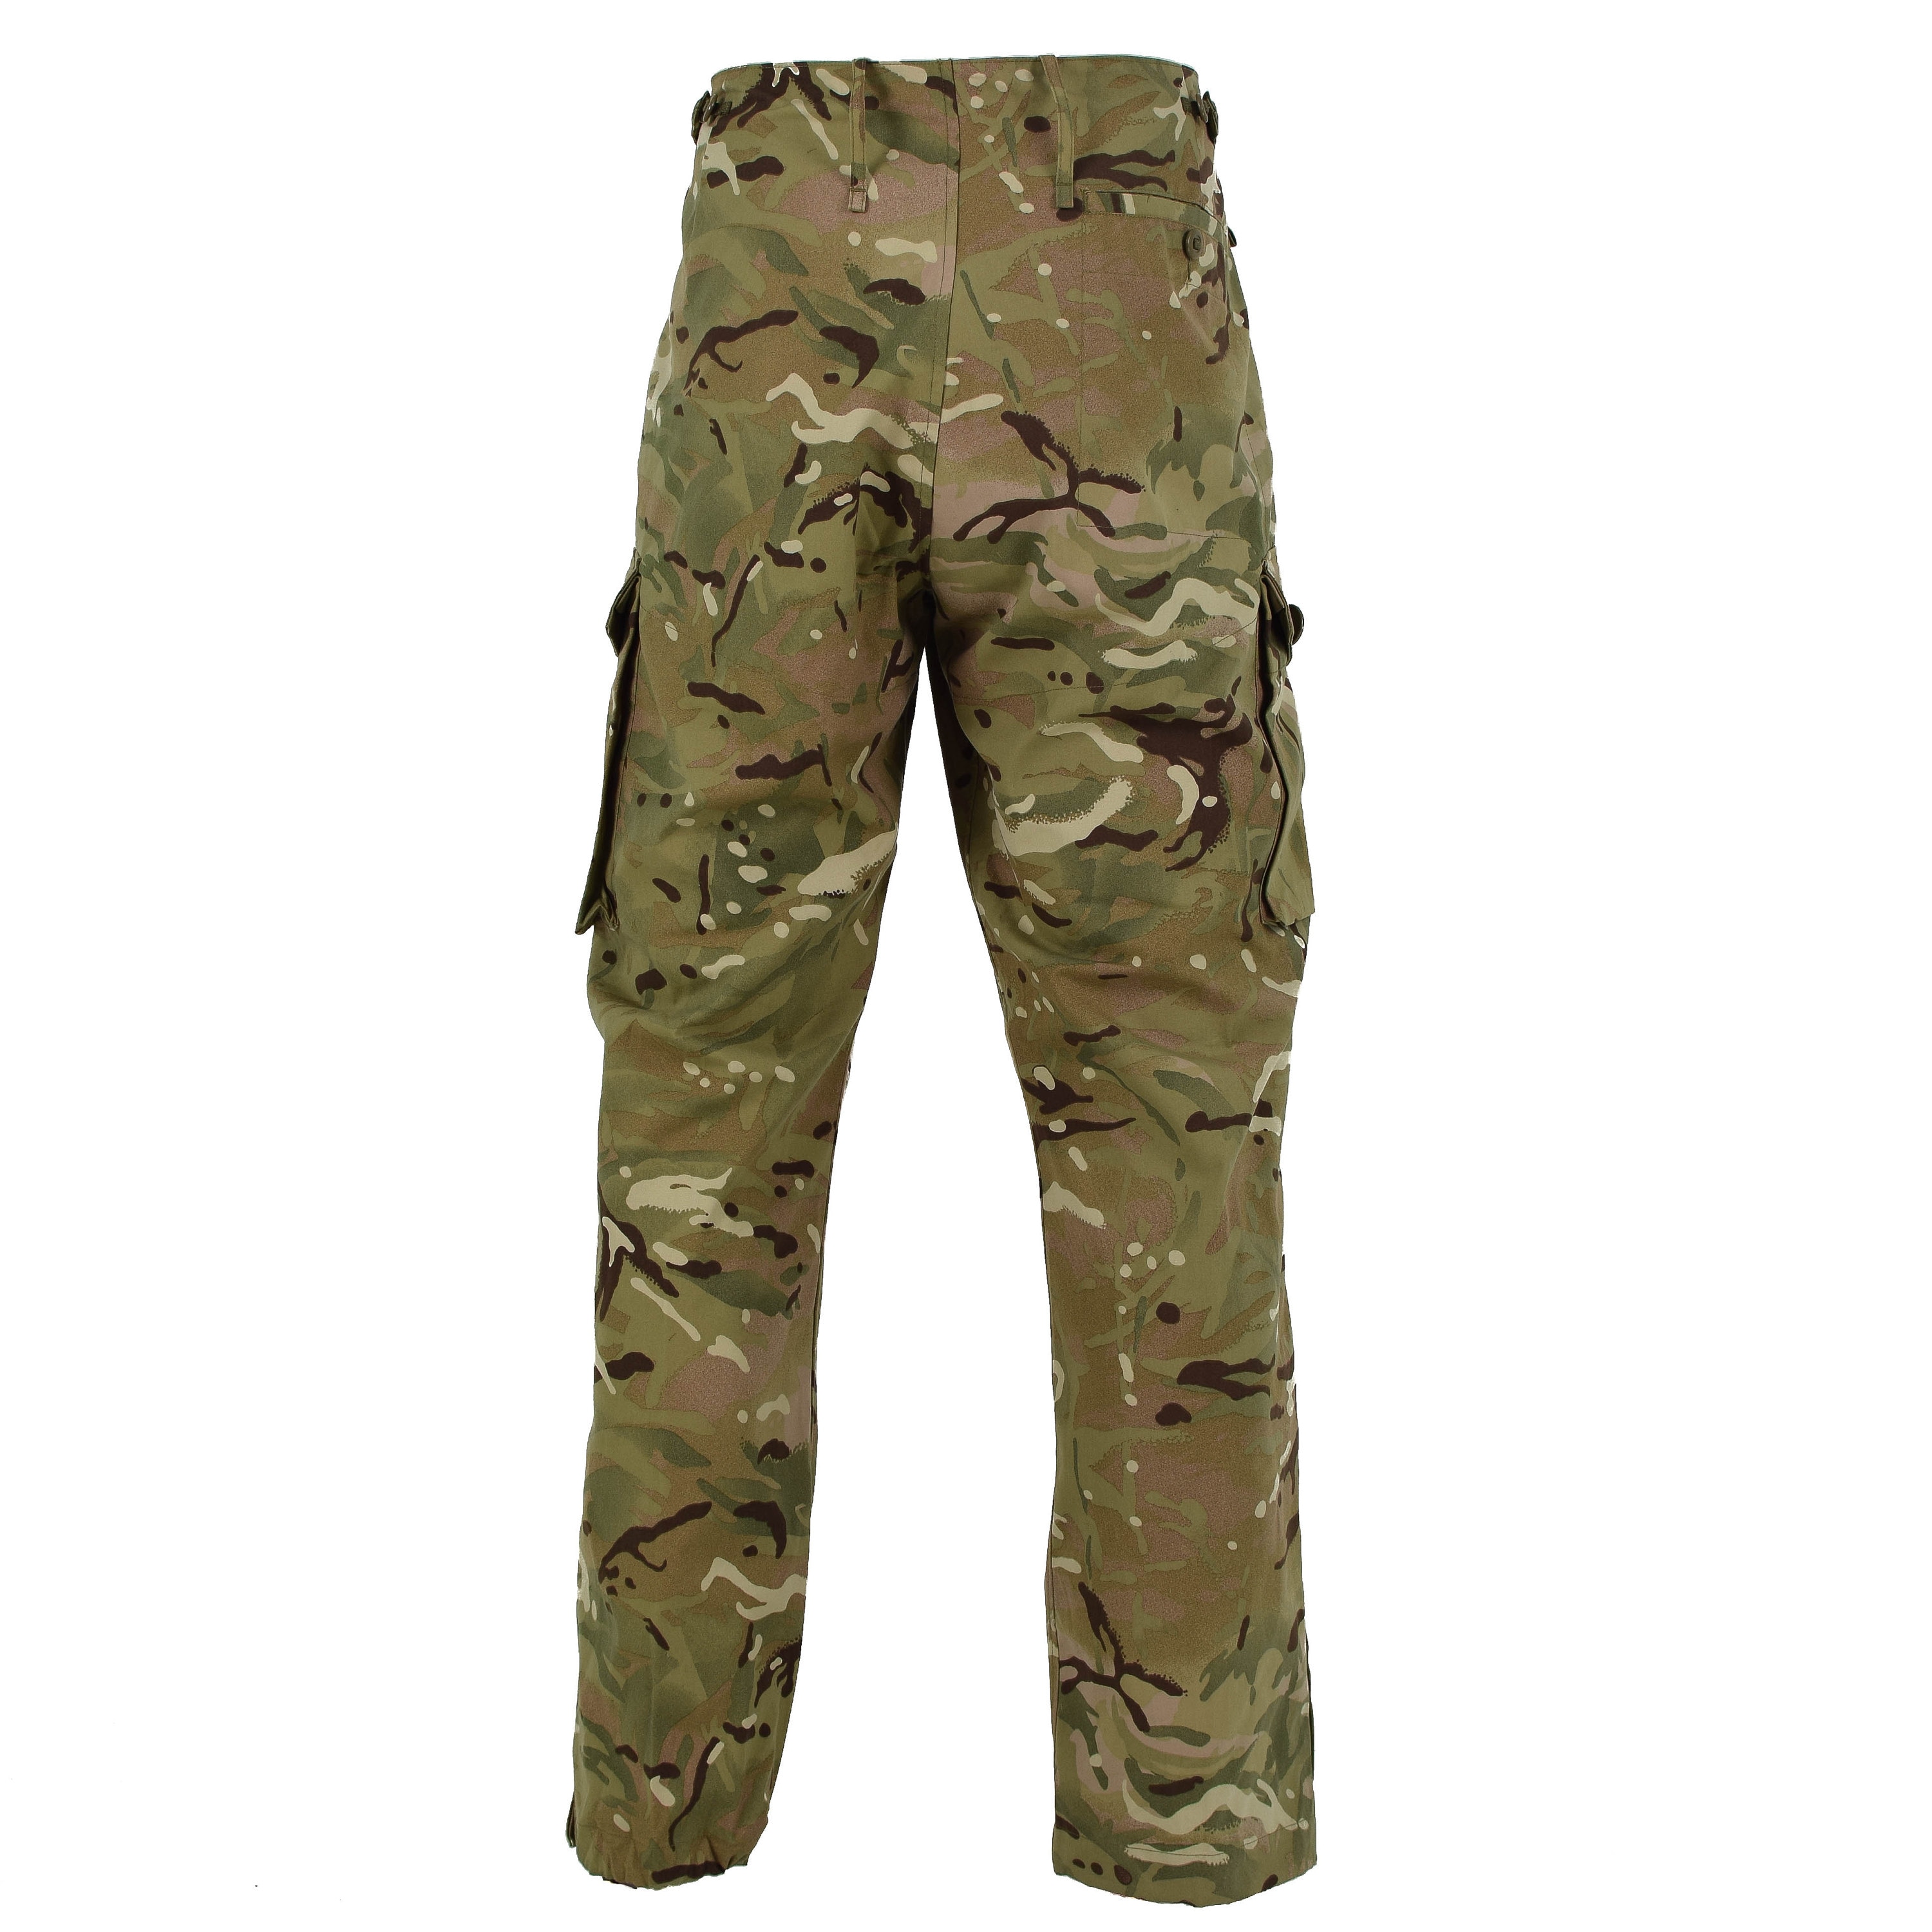 Genuine British army pants field troops military combat MTP trousers